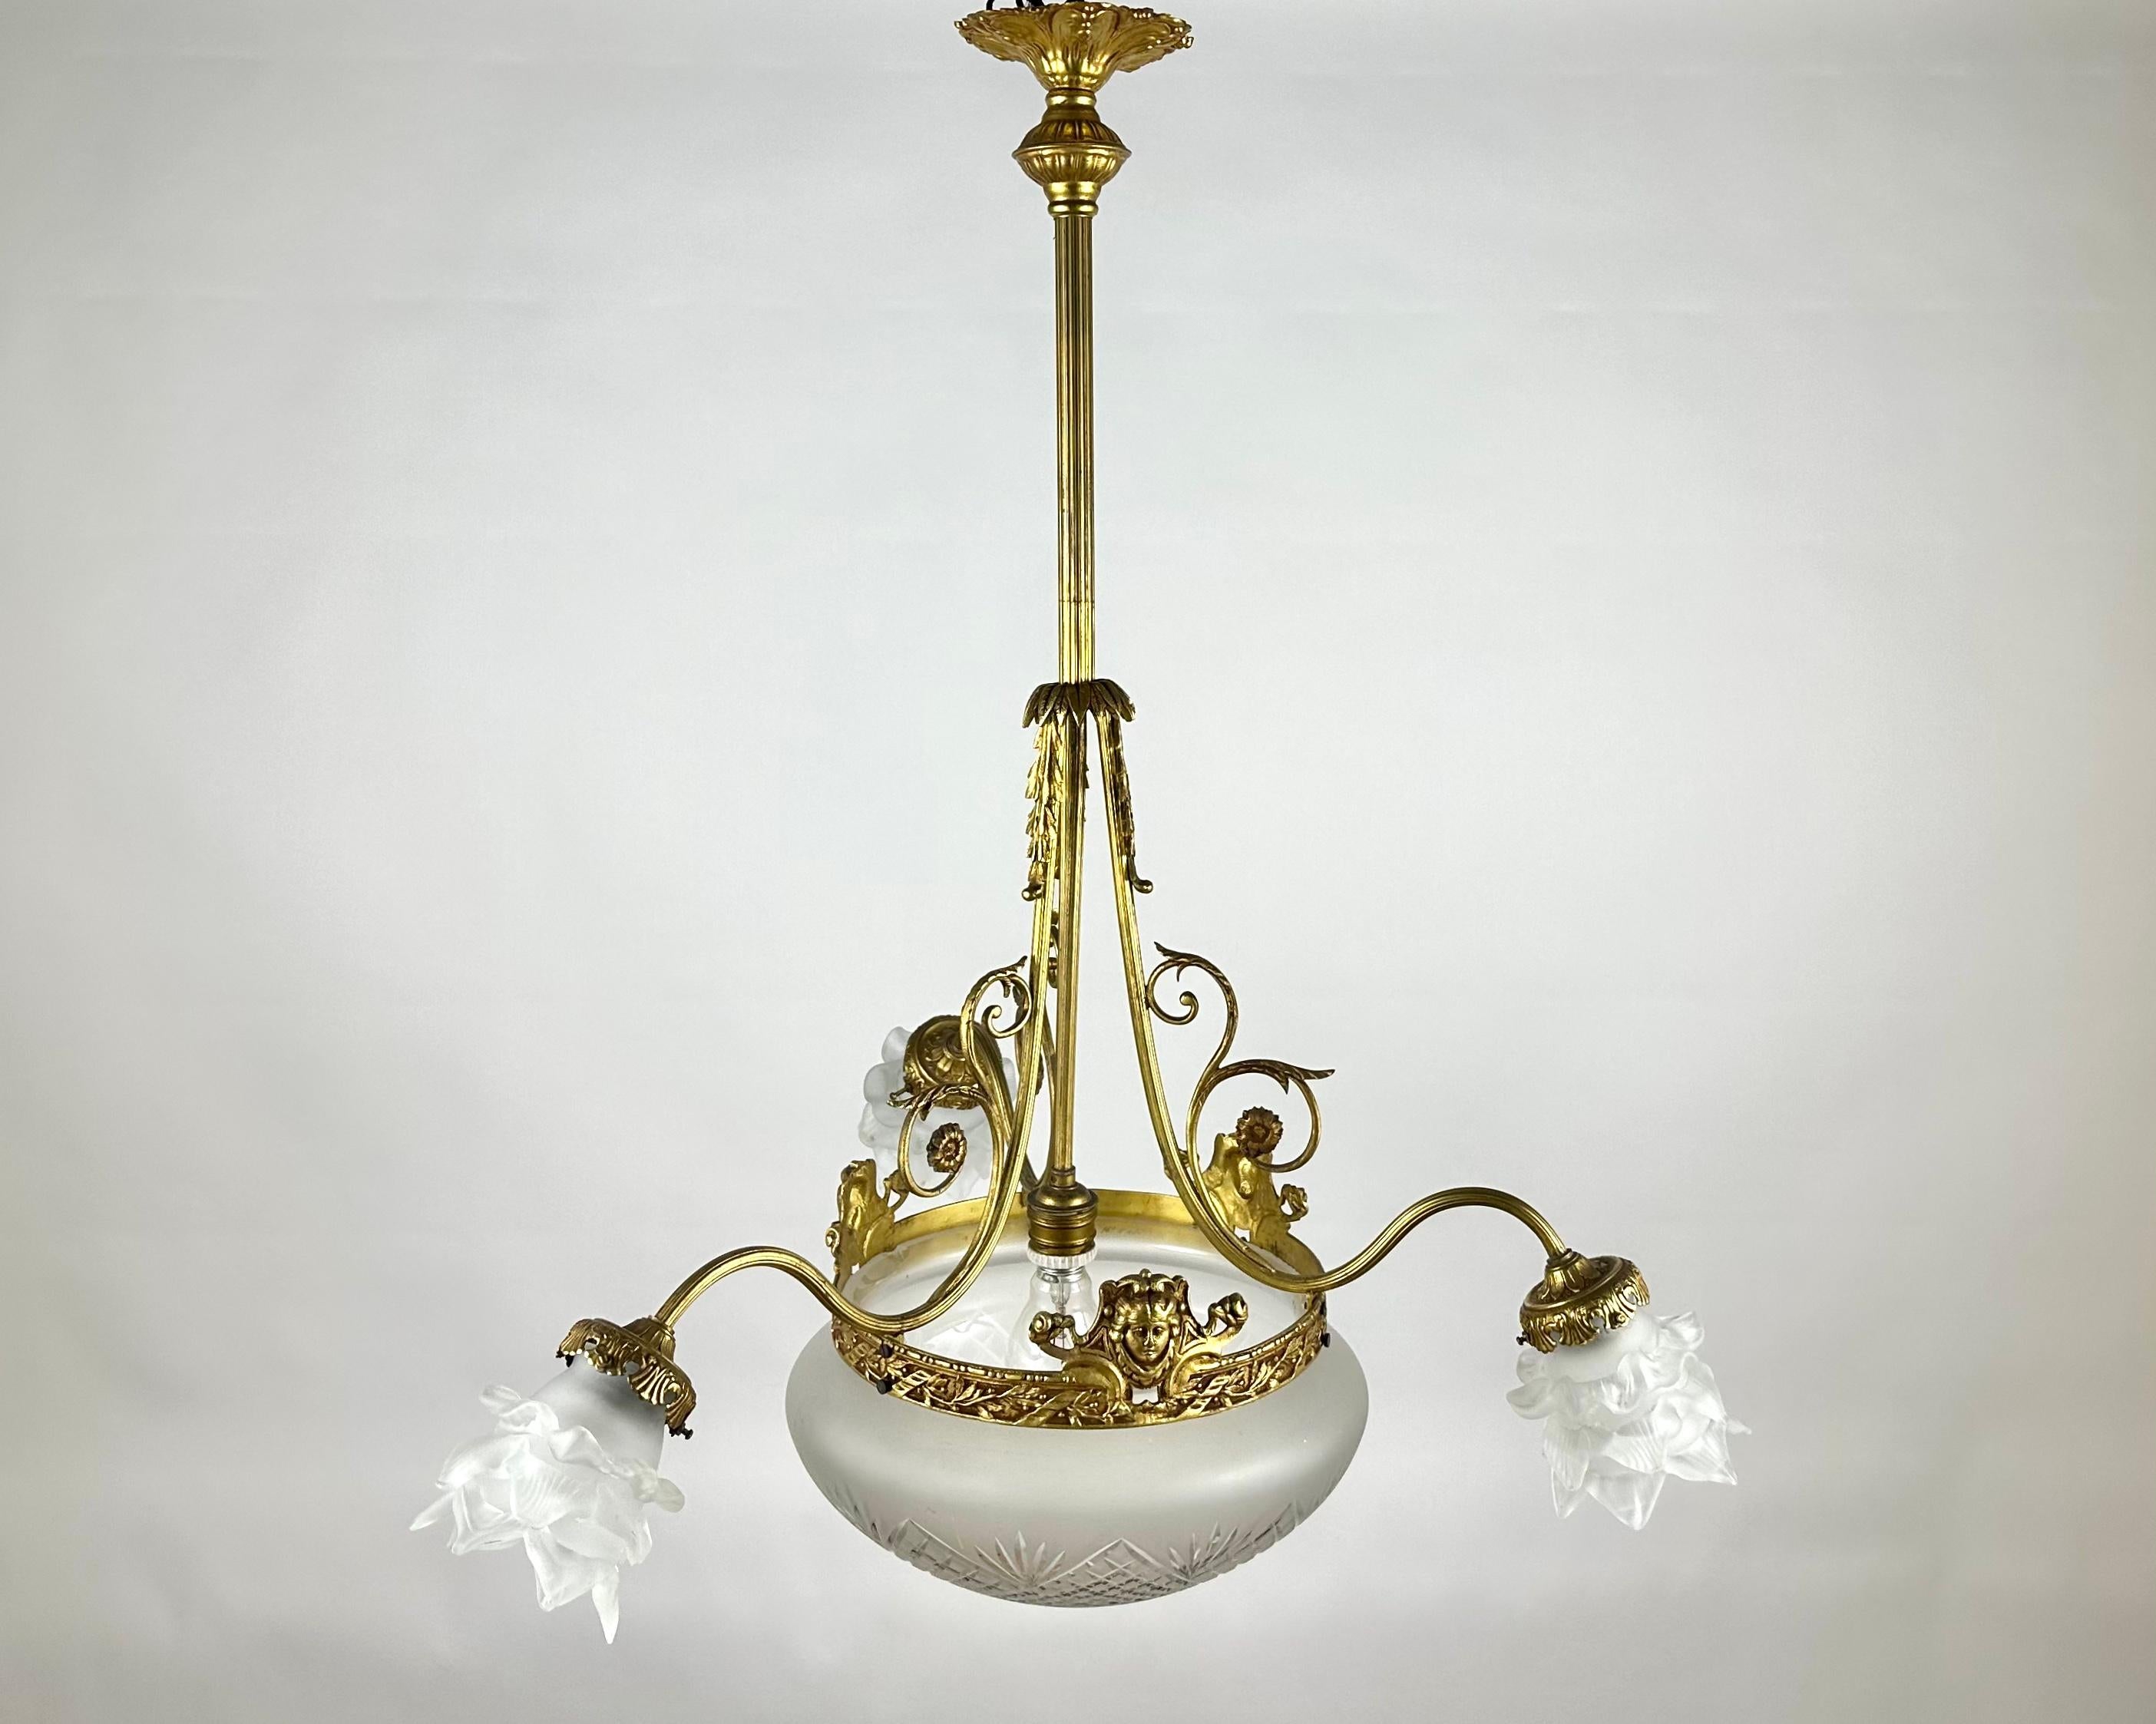 Beautiful Antique Chandelier is manufactured in France, in 1920s. 

Three white matte lampshades framed by aged bronze look, on the one hand, laconic, on the other - elegant.

In the center there is a round closed lampshade, which ensures an even